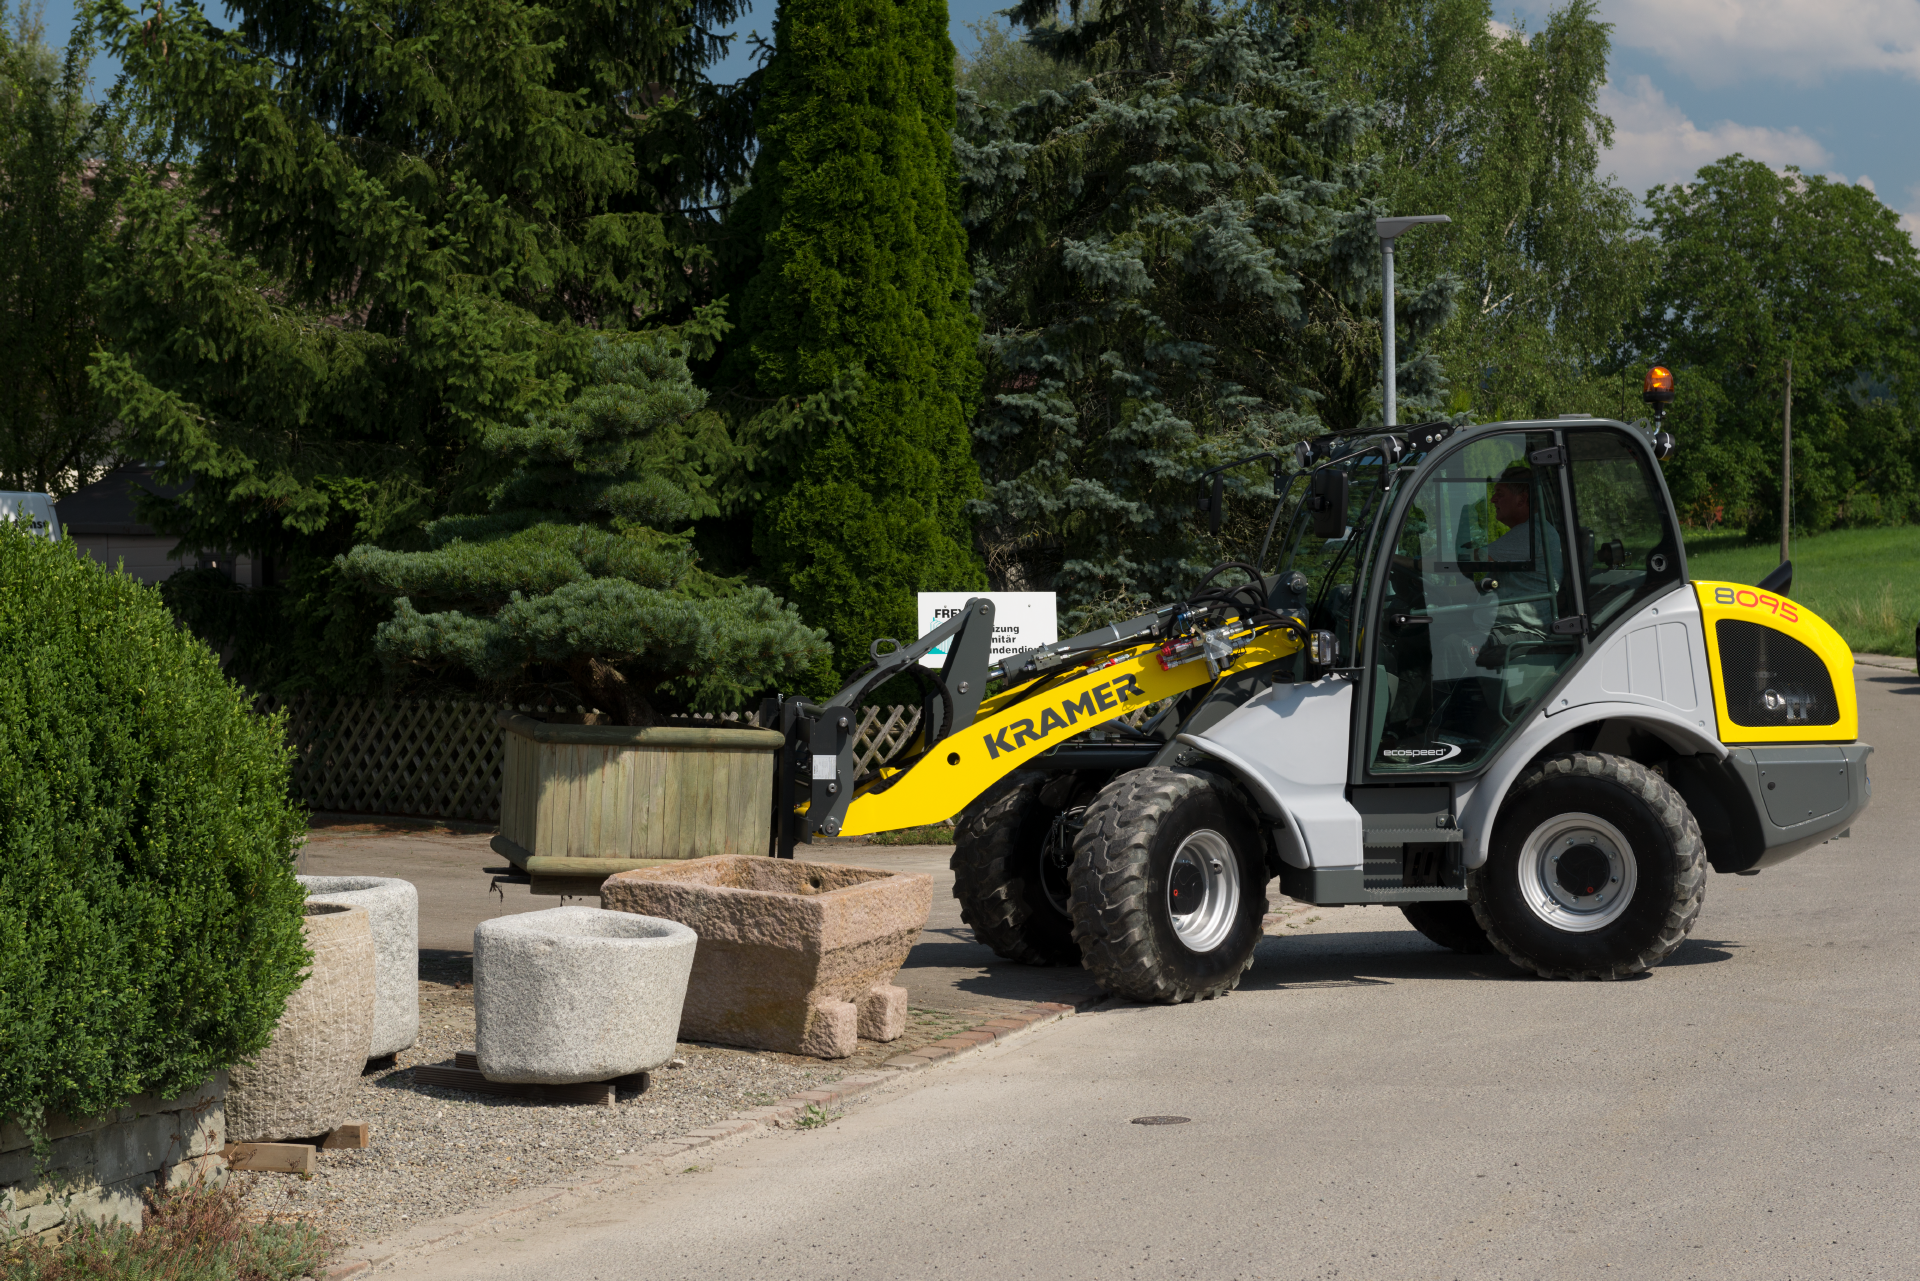 The wheel loader 8095 transporting a flower box.